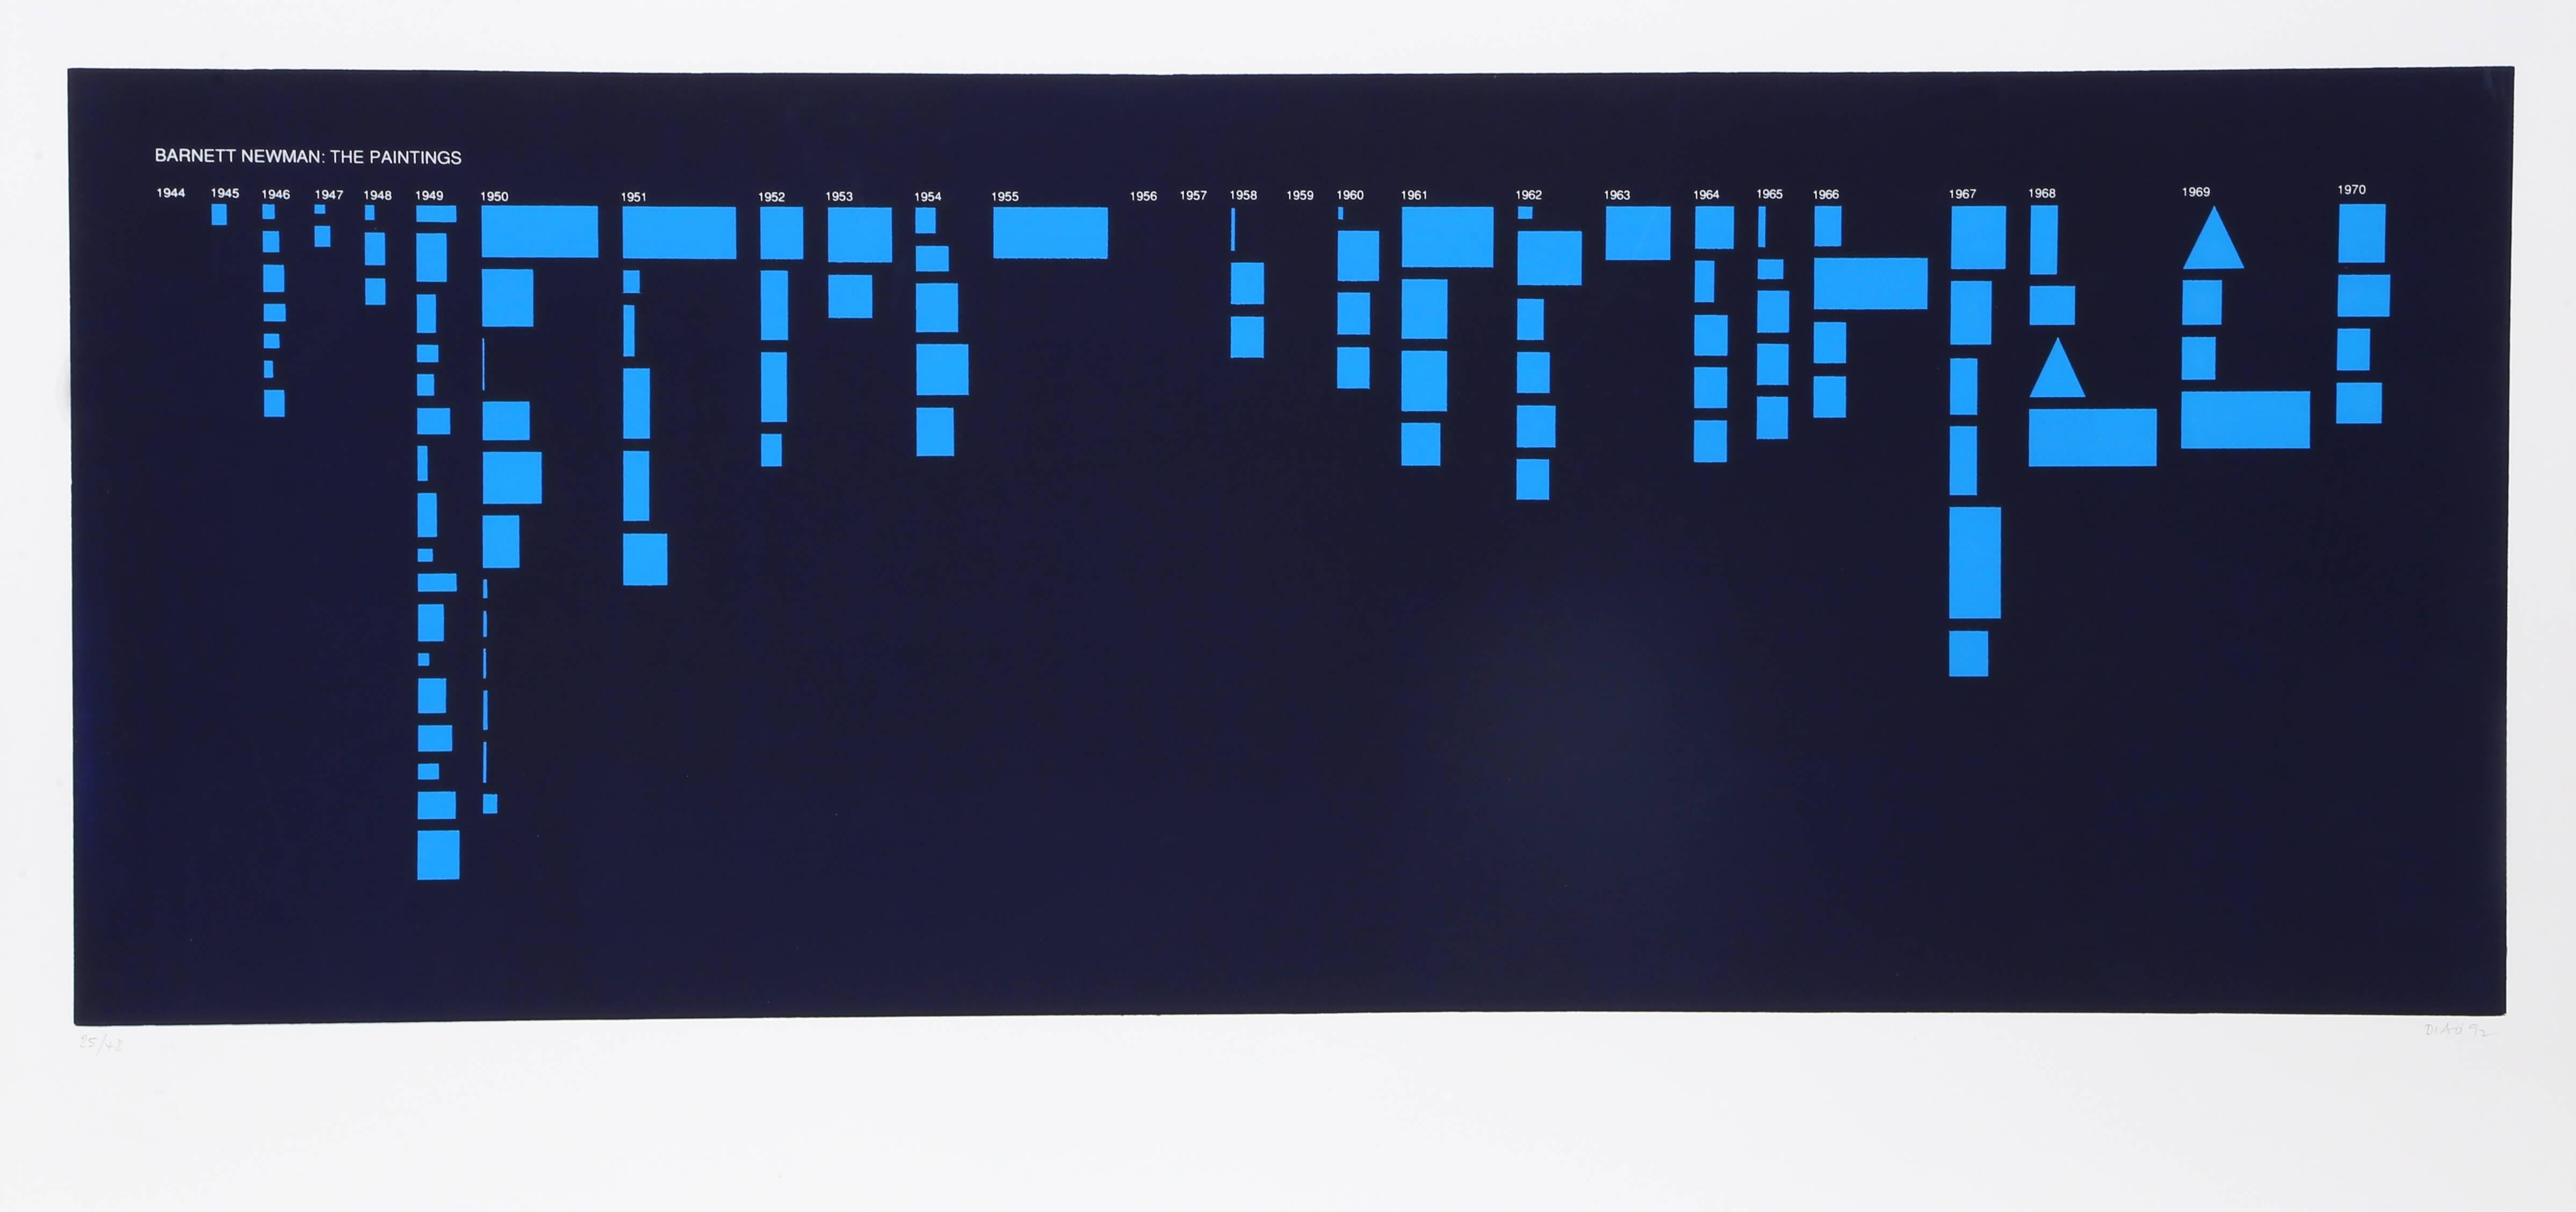 Artist: David Diao, Chinese-American (1943-)
Title: Barnett Newman: The Paintings (Blue)
Year: 1992
Medium: Silkscreen, signed and numbered in pencil
Image: 15 x 39 inches
Size: 30  x 42 inches (76.2  x 106.68 cm)